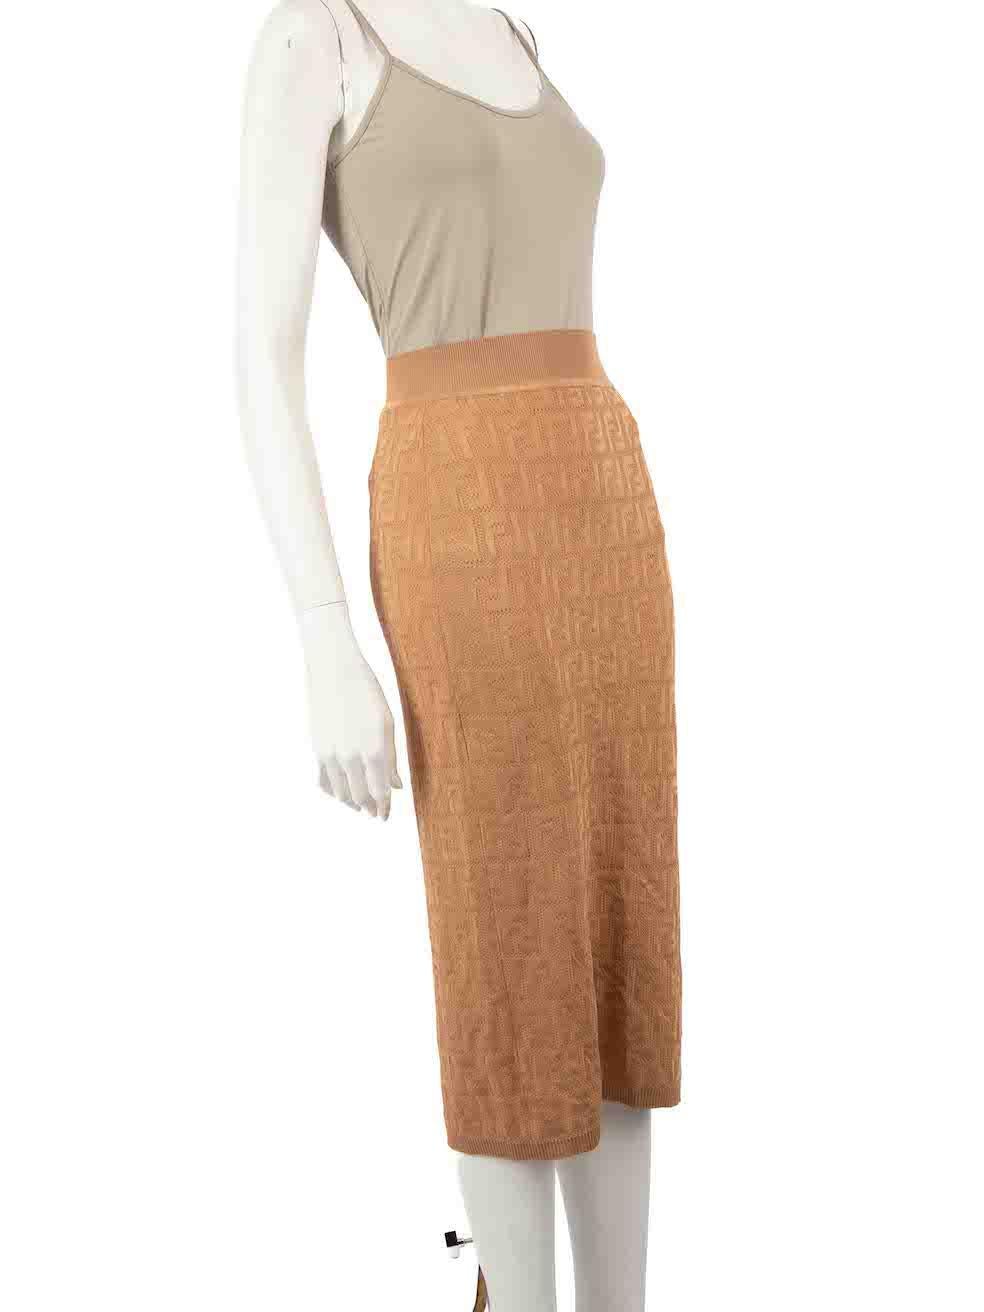 CONDITION is Very good. Hardly any visible wear to skirt is evident on this used Fendi designer resale item.
 
 
 
 Details
 
 
 Brown
 
 Cotton
 
 Pencil skirt
 
 Midi length
 
 FF Zucca pattern
 
 Elasticated waistband
 
 Knitted and stretchy
 
 
